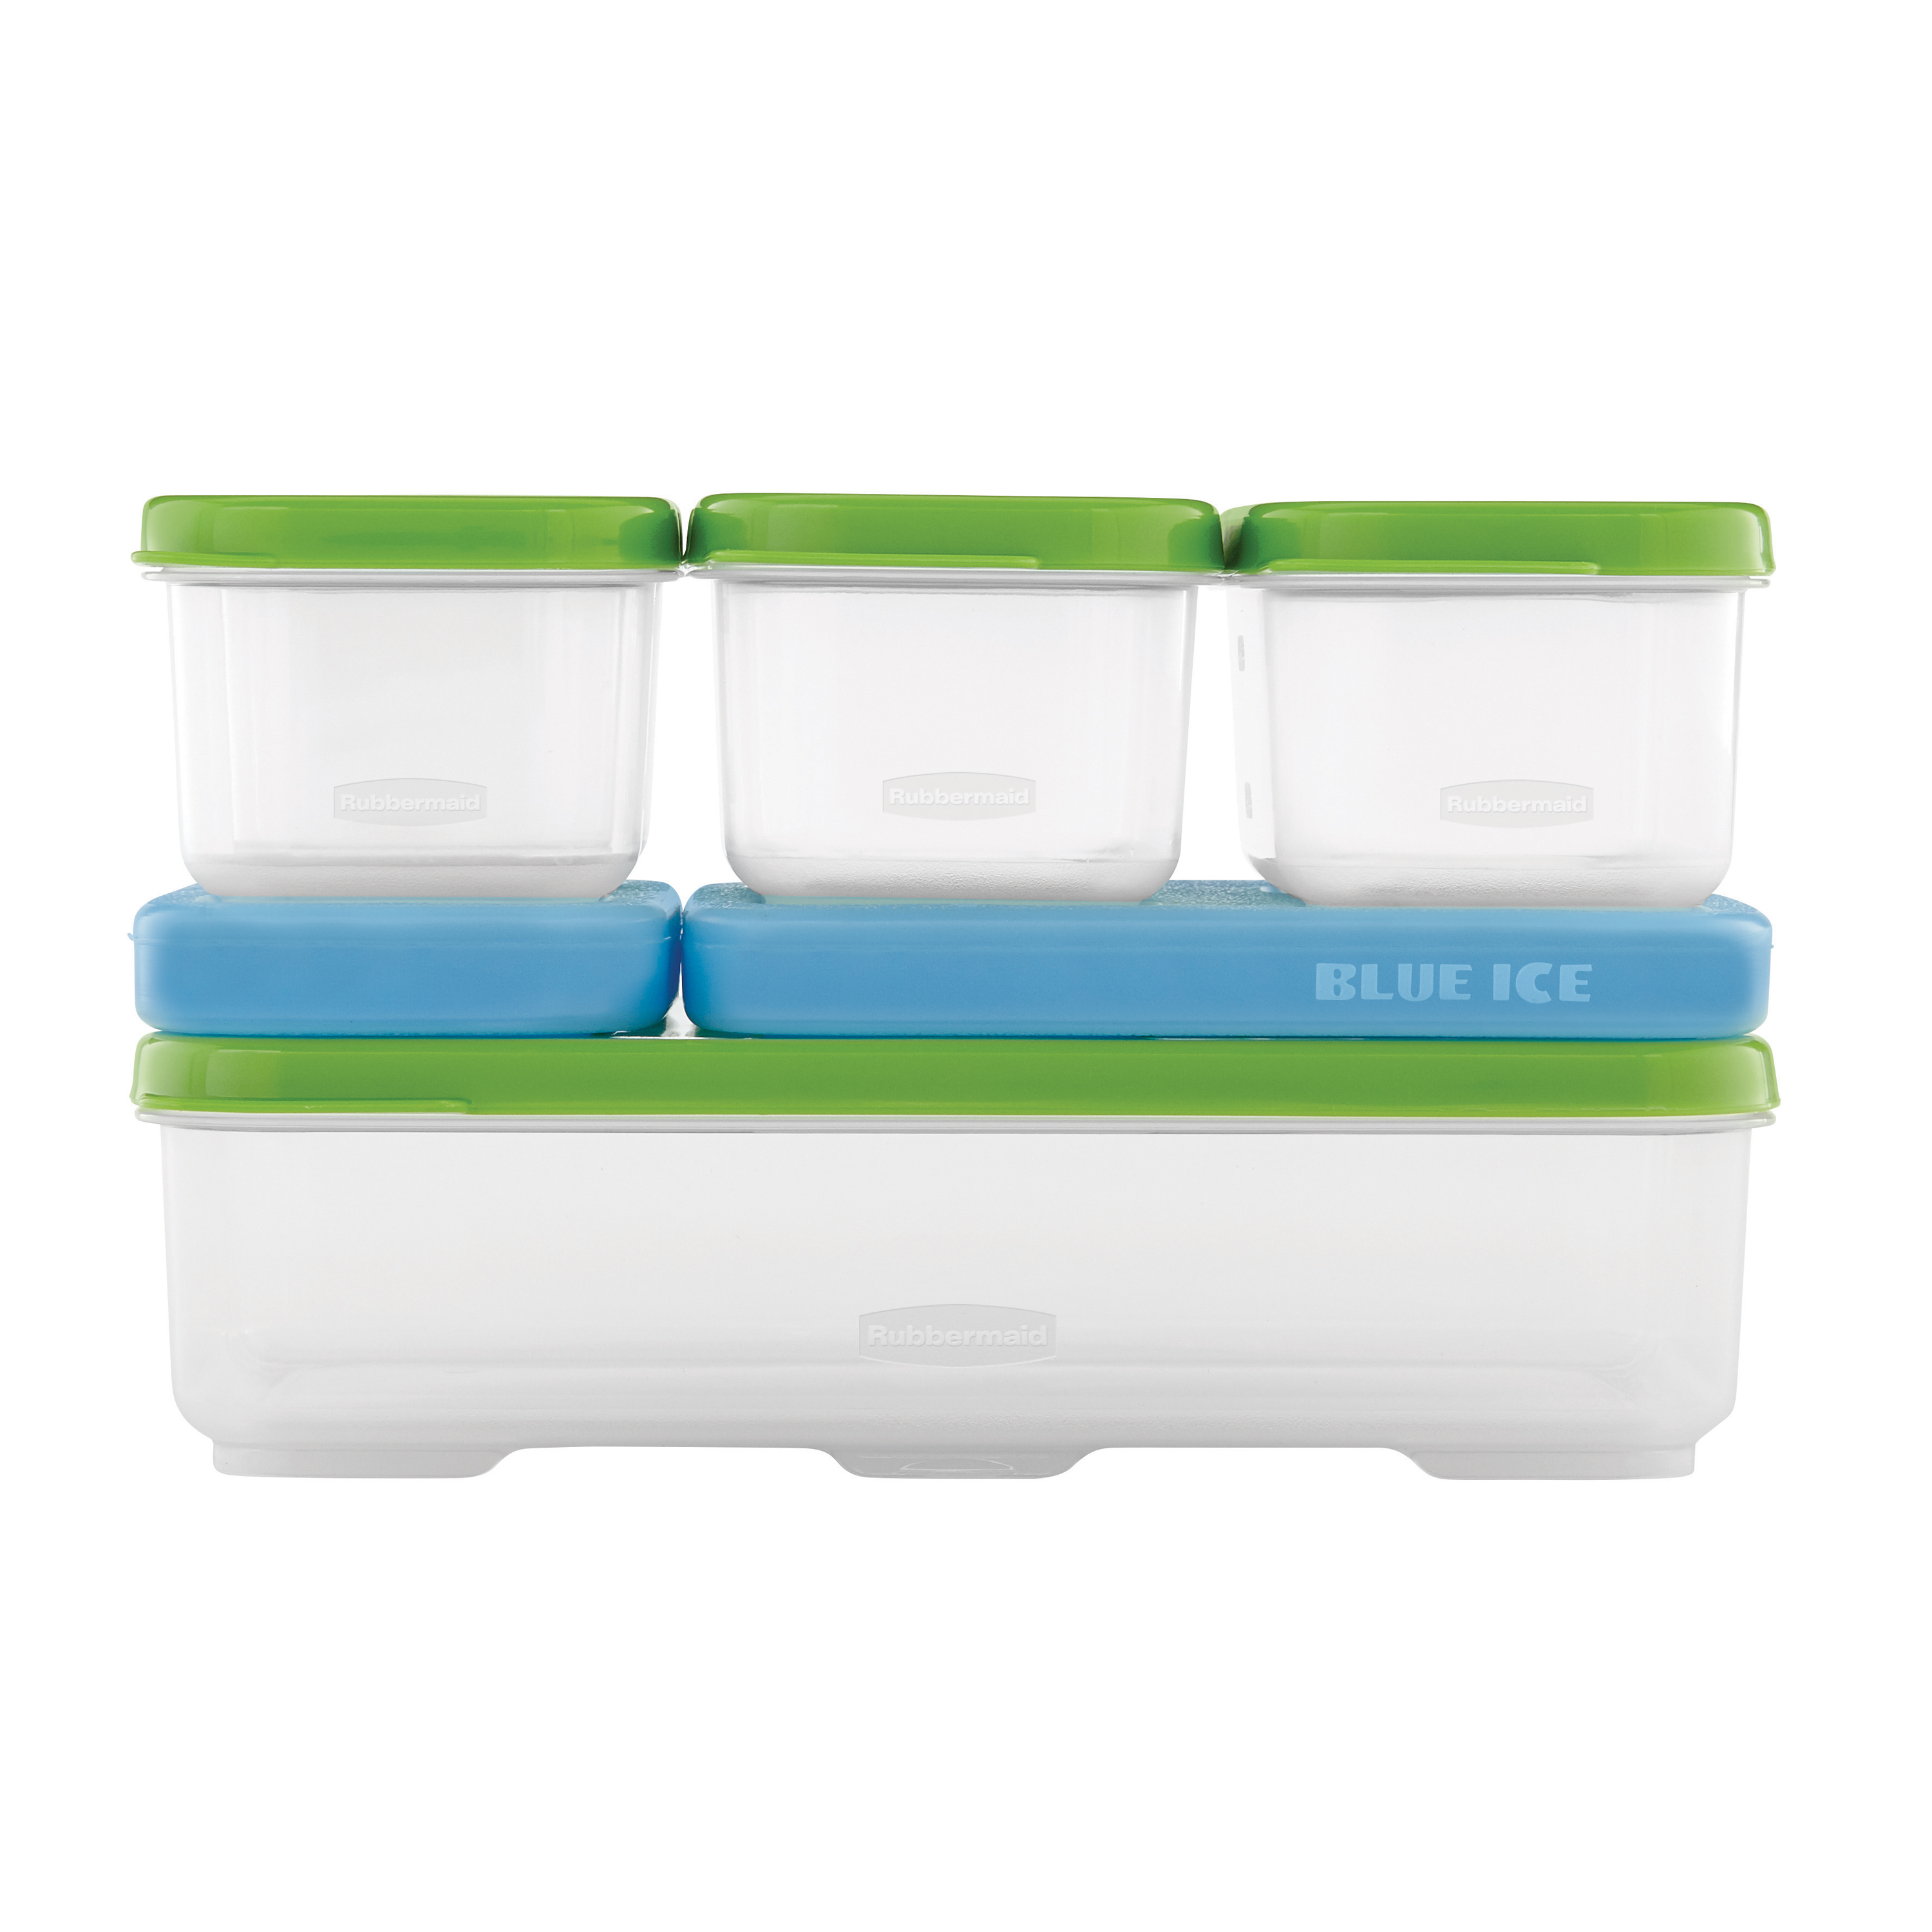 Rubbermaid LunchBlox 7-Piece Modular Entree Food Containers with Blue Ice Snap-Ins - image 2 of 4